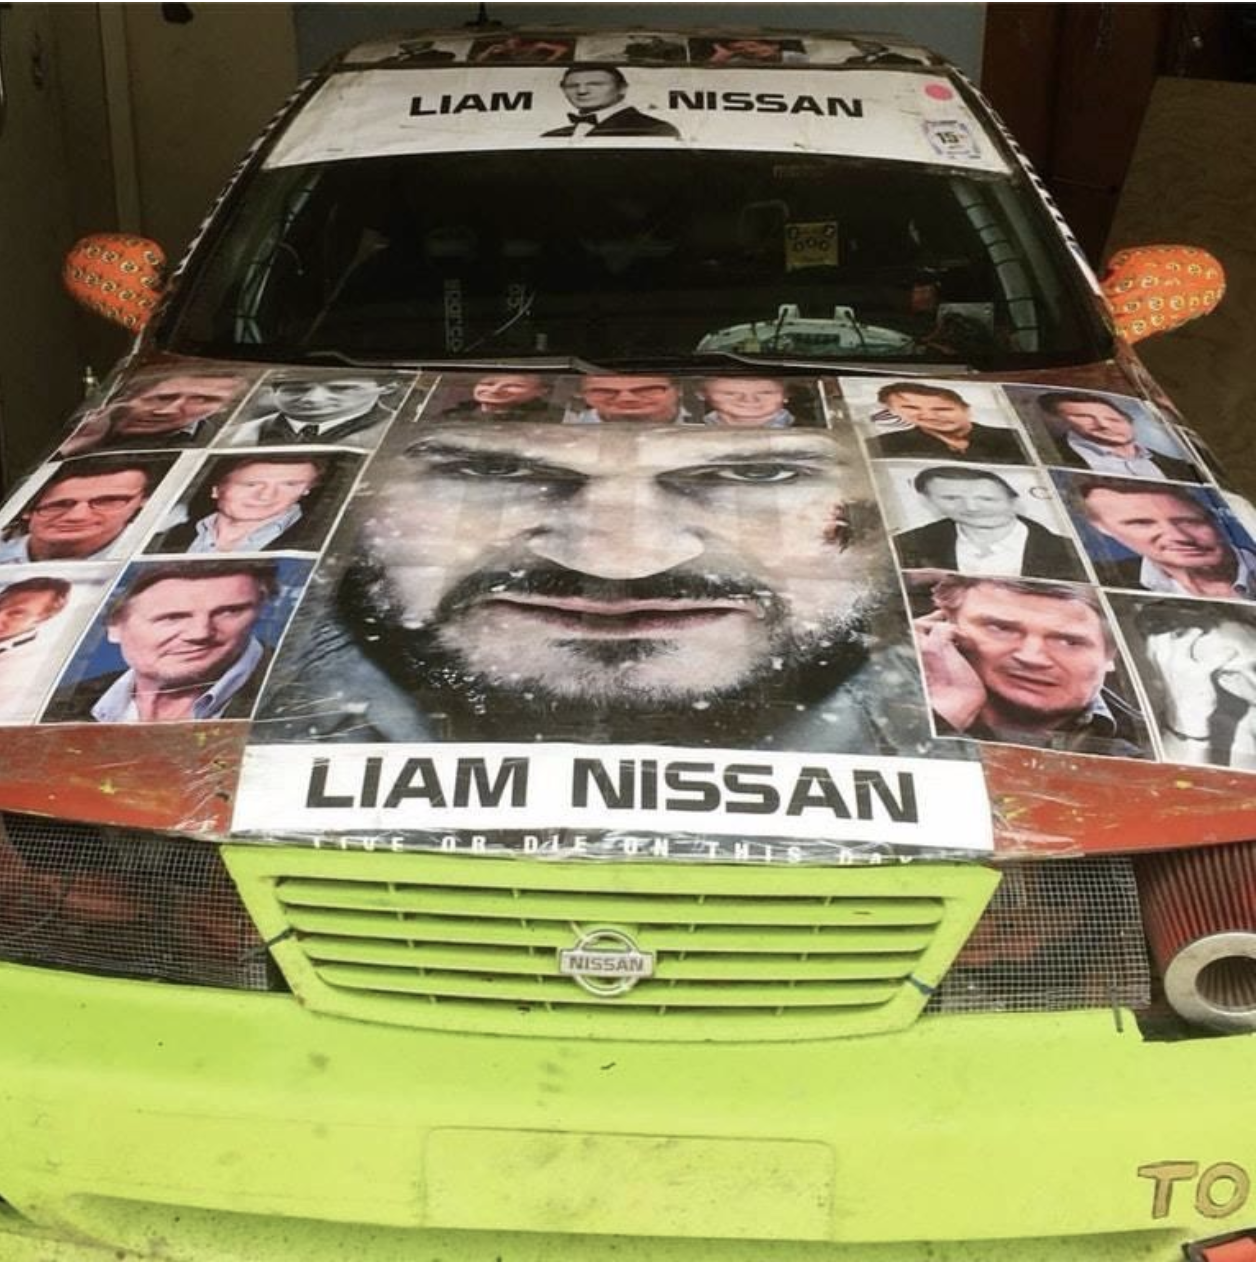 A Nissan car with photos of Liam Neeson on it